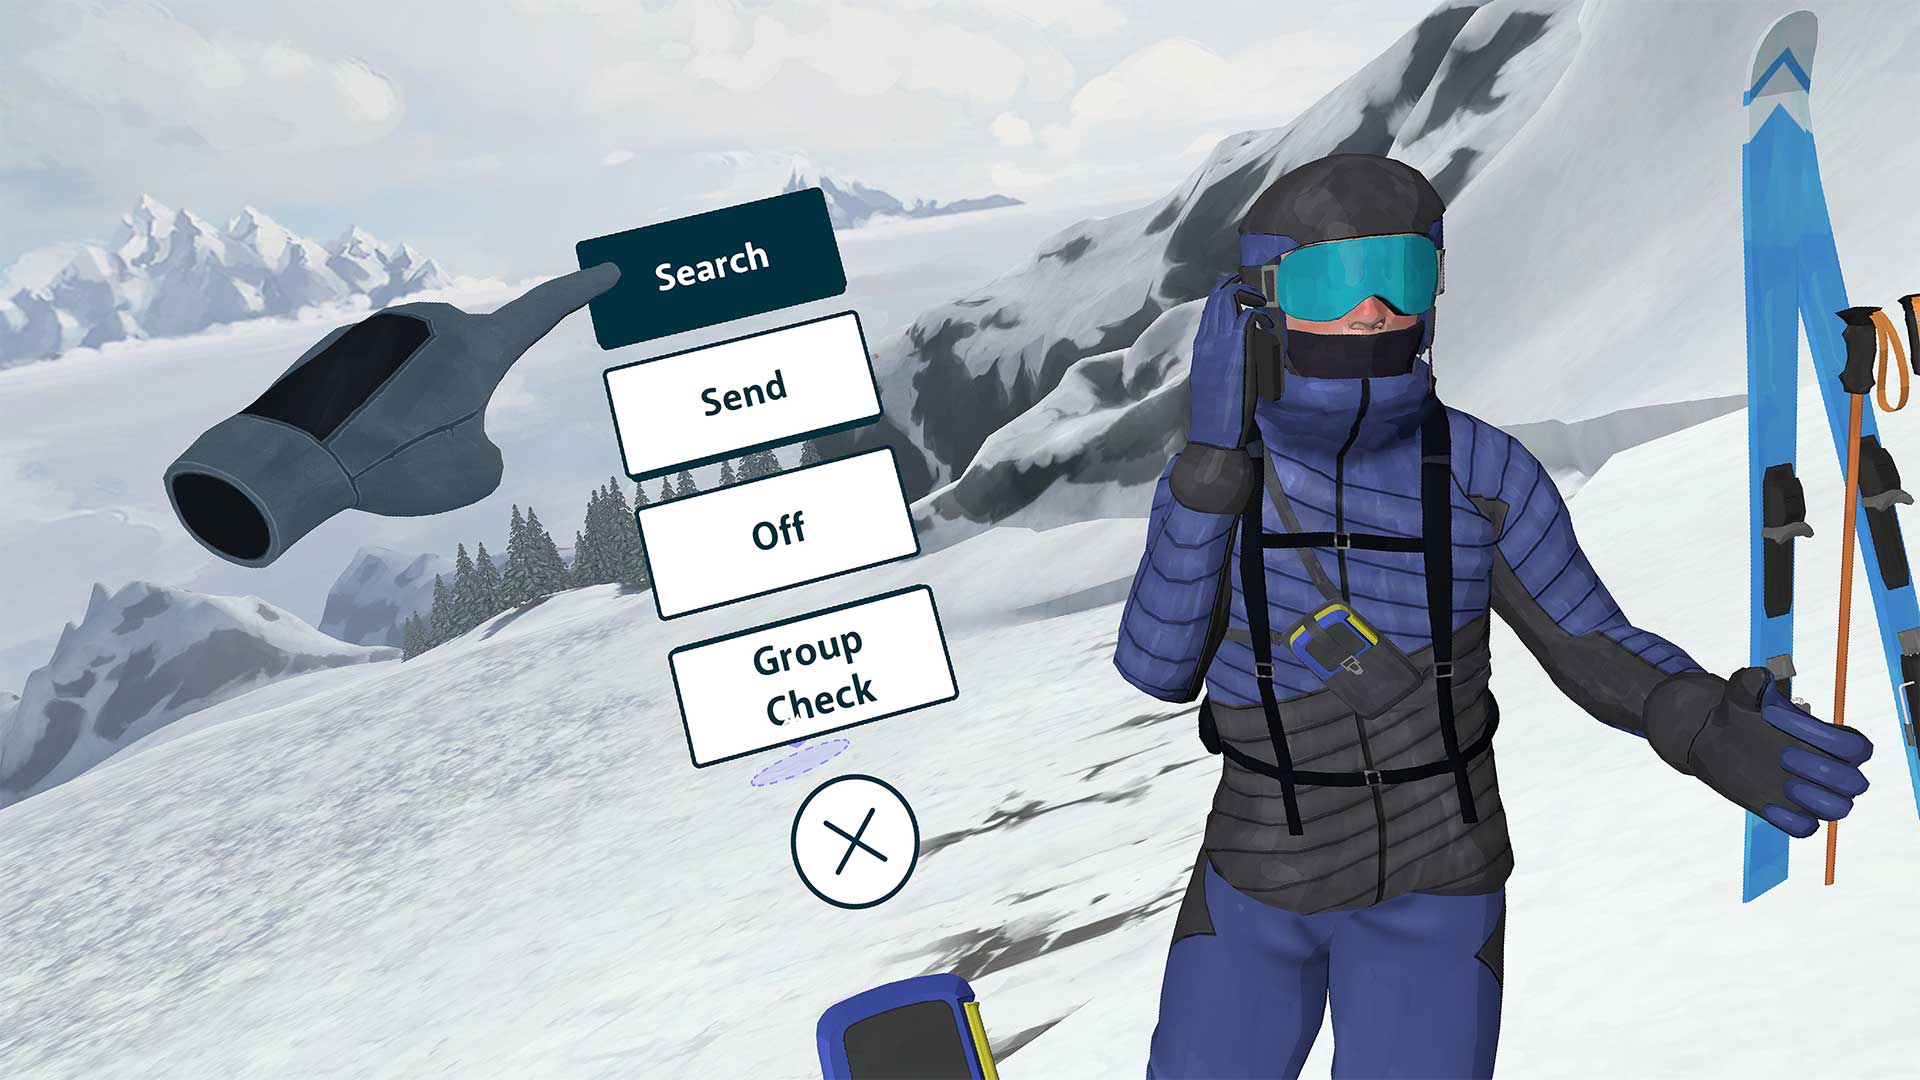 The Notfall Lawine VR app allows users to experience and learn how to perform a successful avalance rescue.